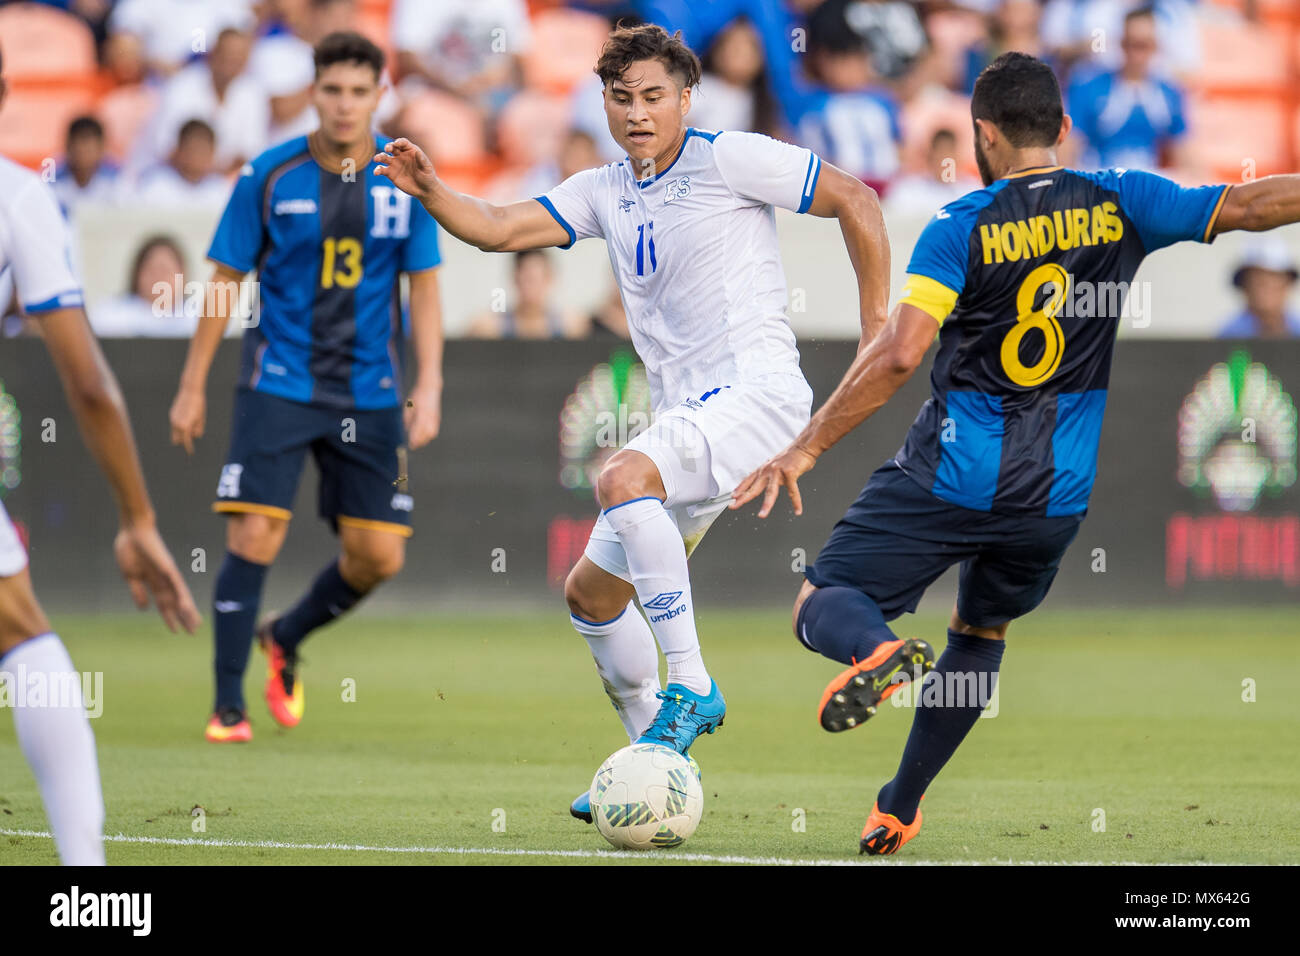 Houston, TX, USA. 2nd June, 2018. El Salvador forward Dustin Corea (11) fights for the ball during an international soccer friendly match between Honduras and El Salvador at BBVA Compass Stadium in Houston, TX. El Salvador won the game 1 to 0.Trask Smith/CSM/Alamy Live News Stock Photo